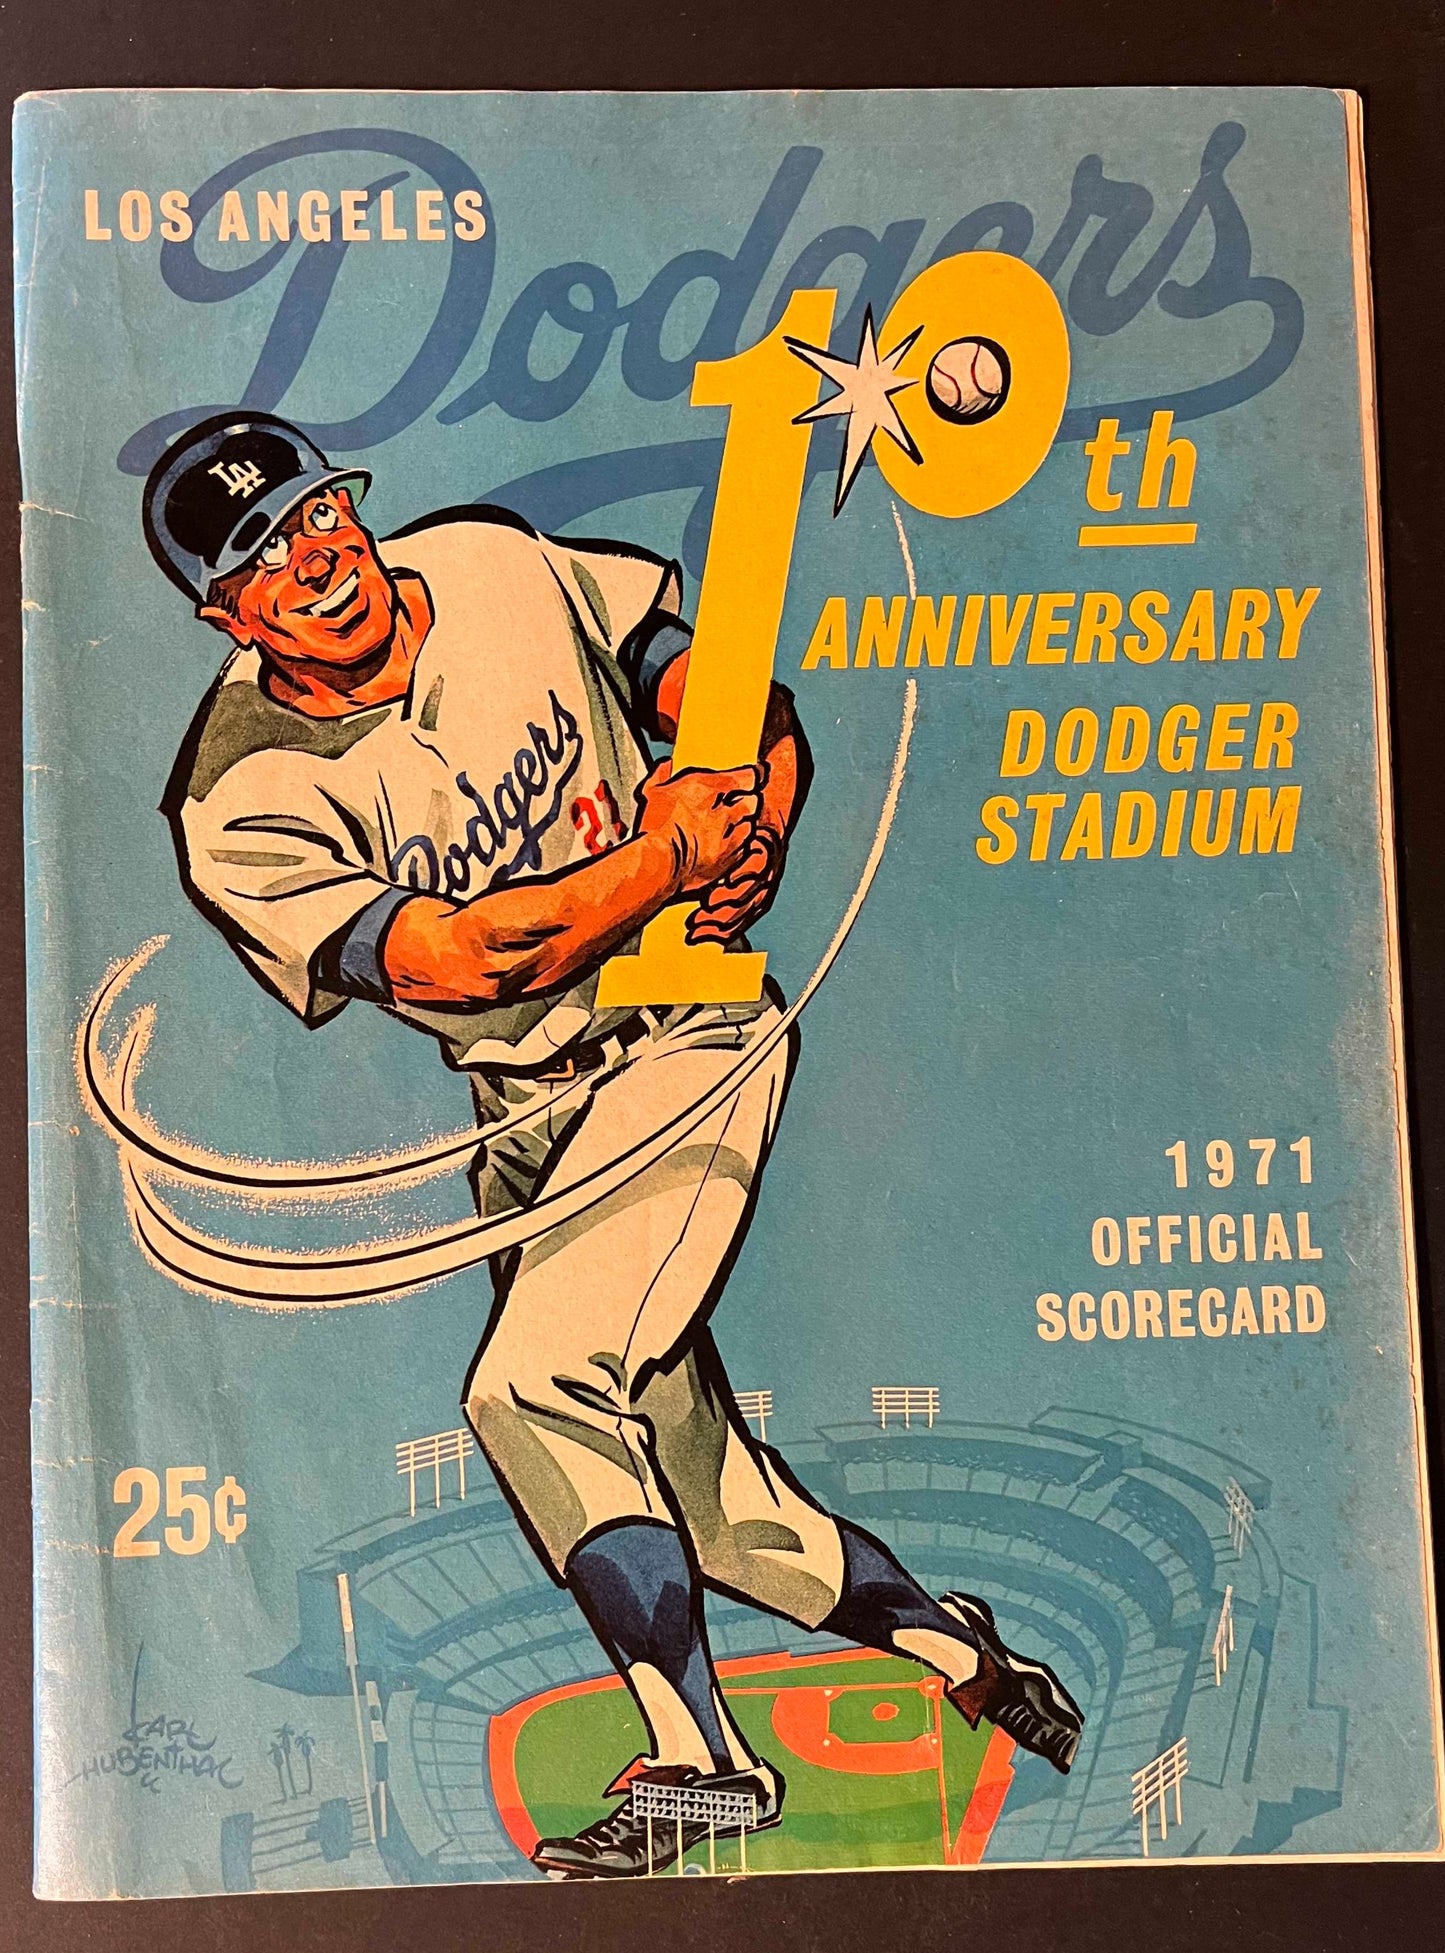 The cover boasts an exuberant illustration of a Dodgers batter in action, encapsulating the excitement of the game against the backdrop of Dodger Stadium and the LA skyline.